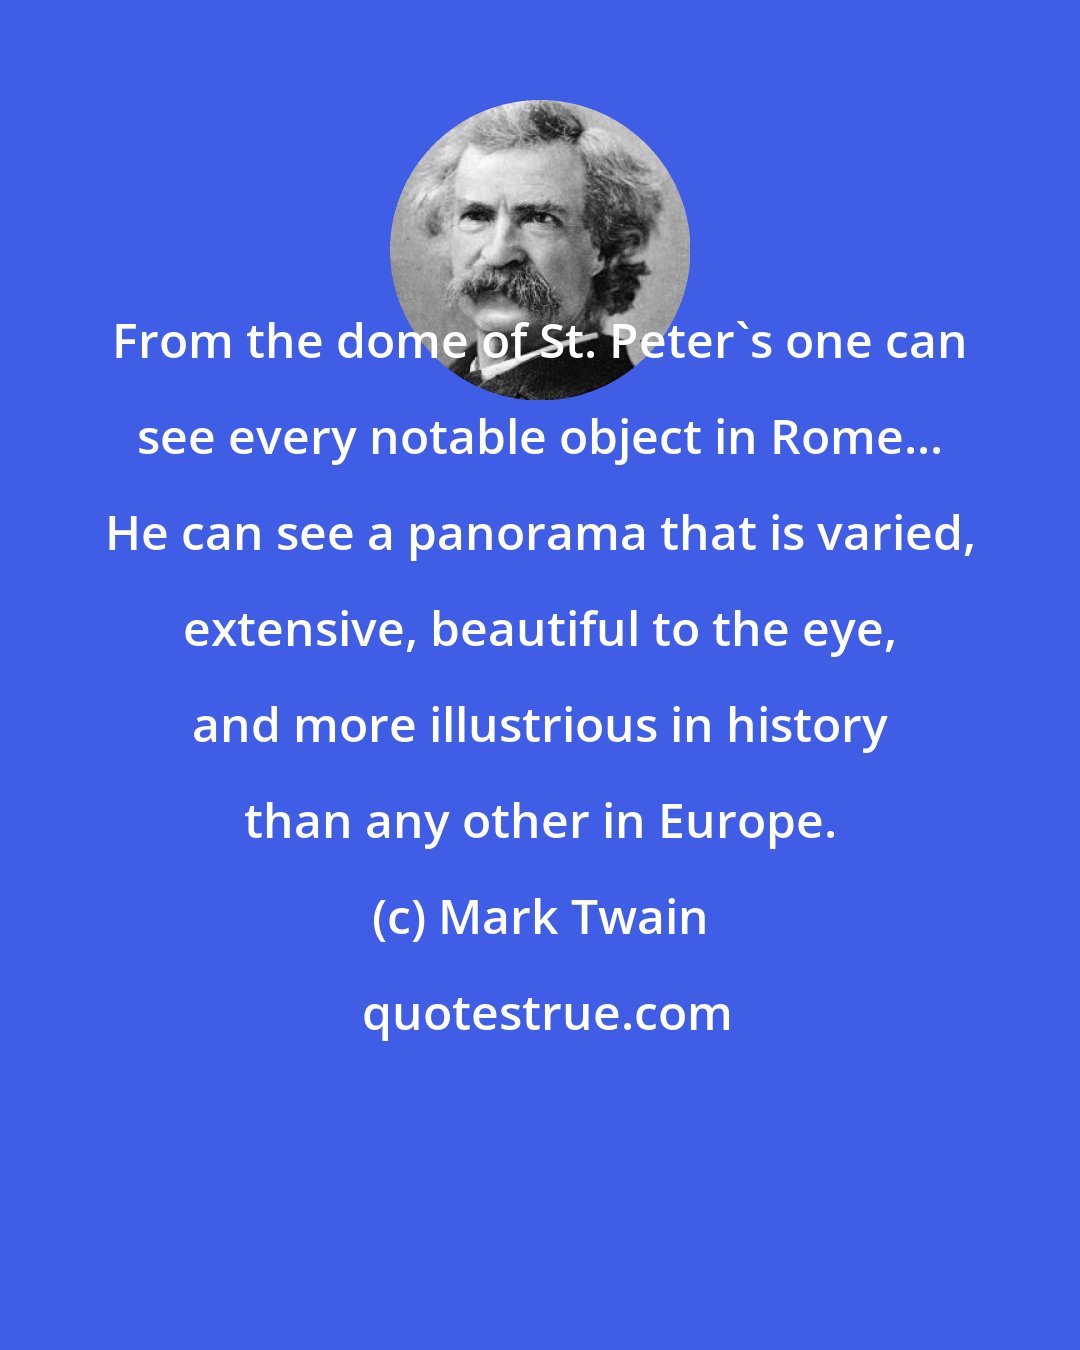 Mark Twain: From the dome of St. Peter's one can see every notable object in Rome... He can see a panorama that is varied, extensive, beautiful to the eye, and more illustrious in history than any other in Europe.